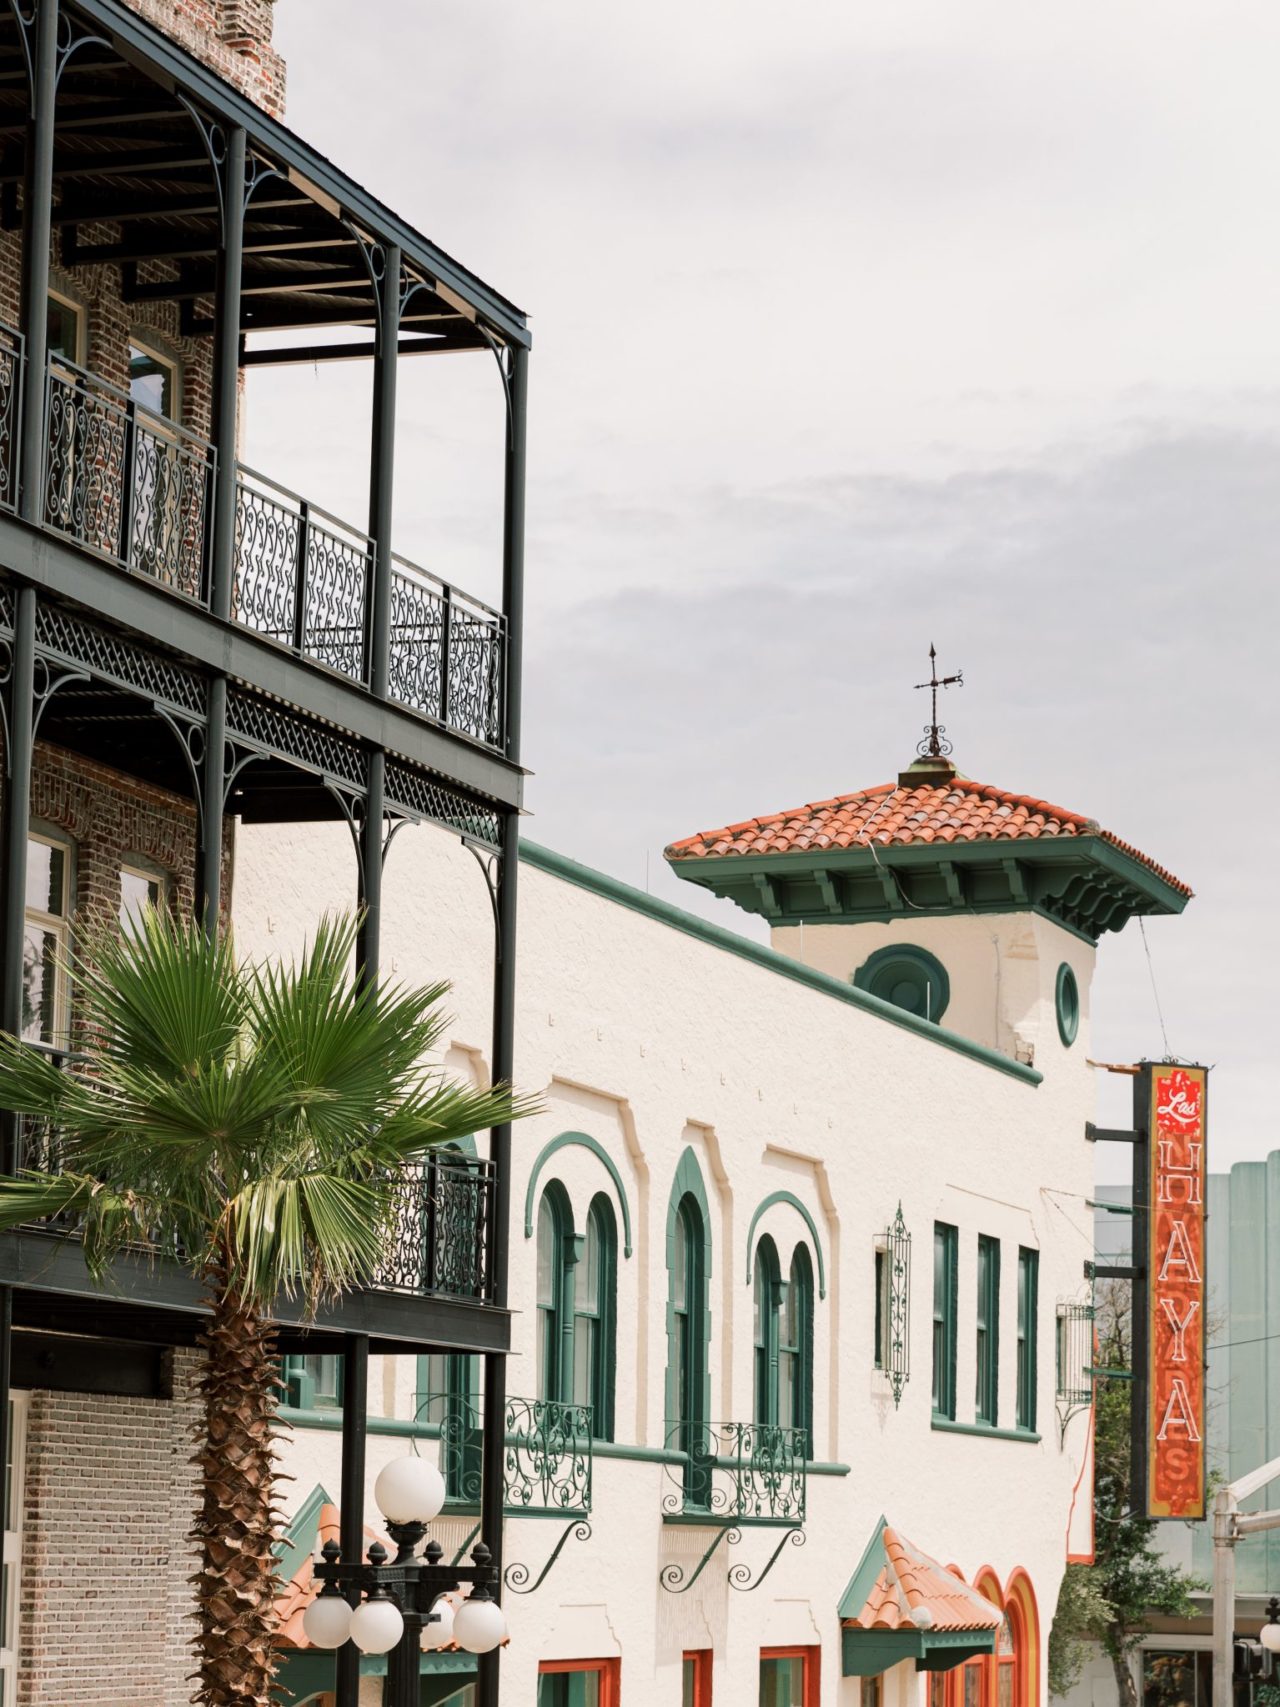 Exterior and sign for Hotel Haya, our Ybor City boutique hotel